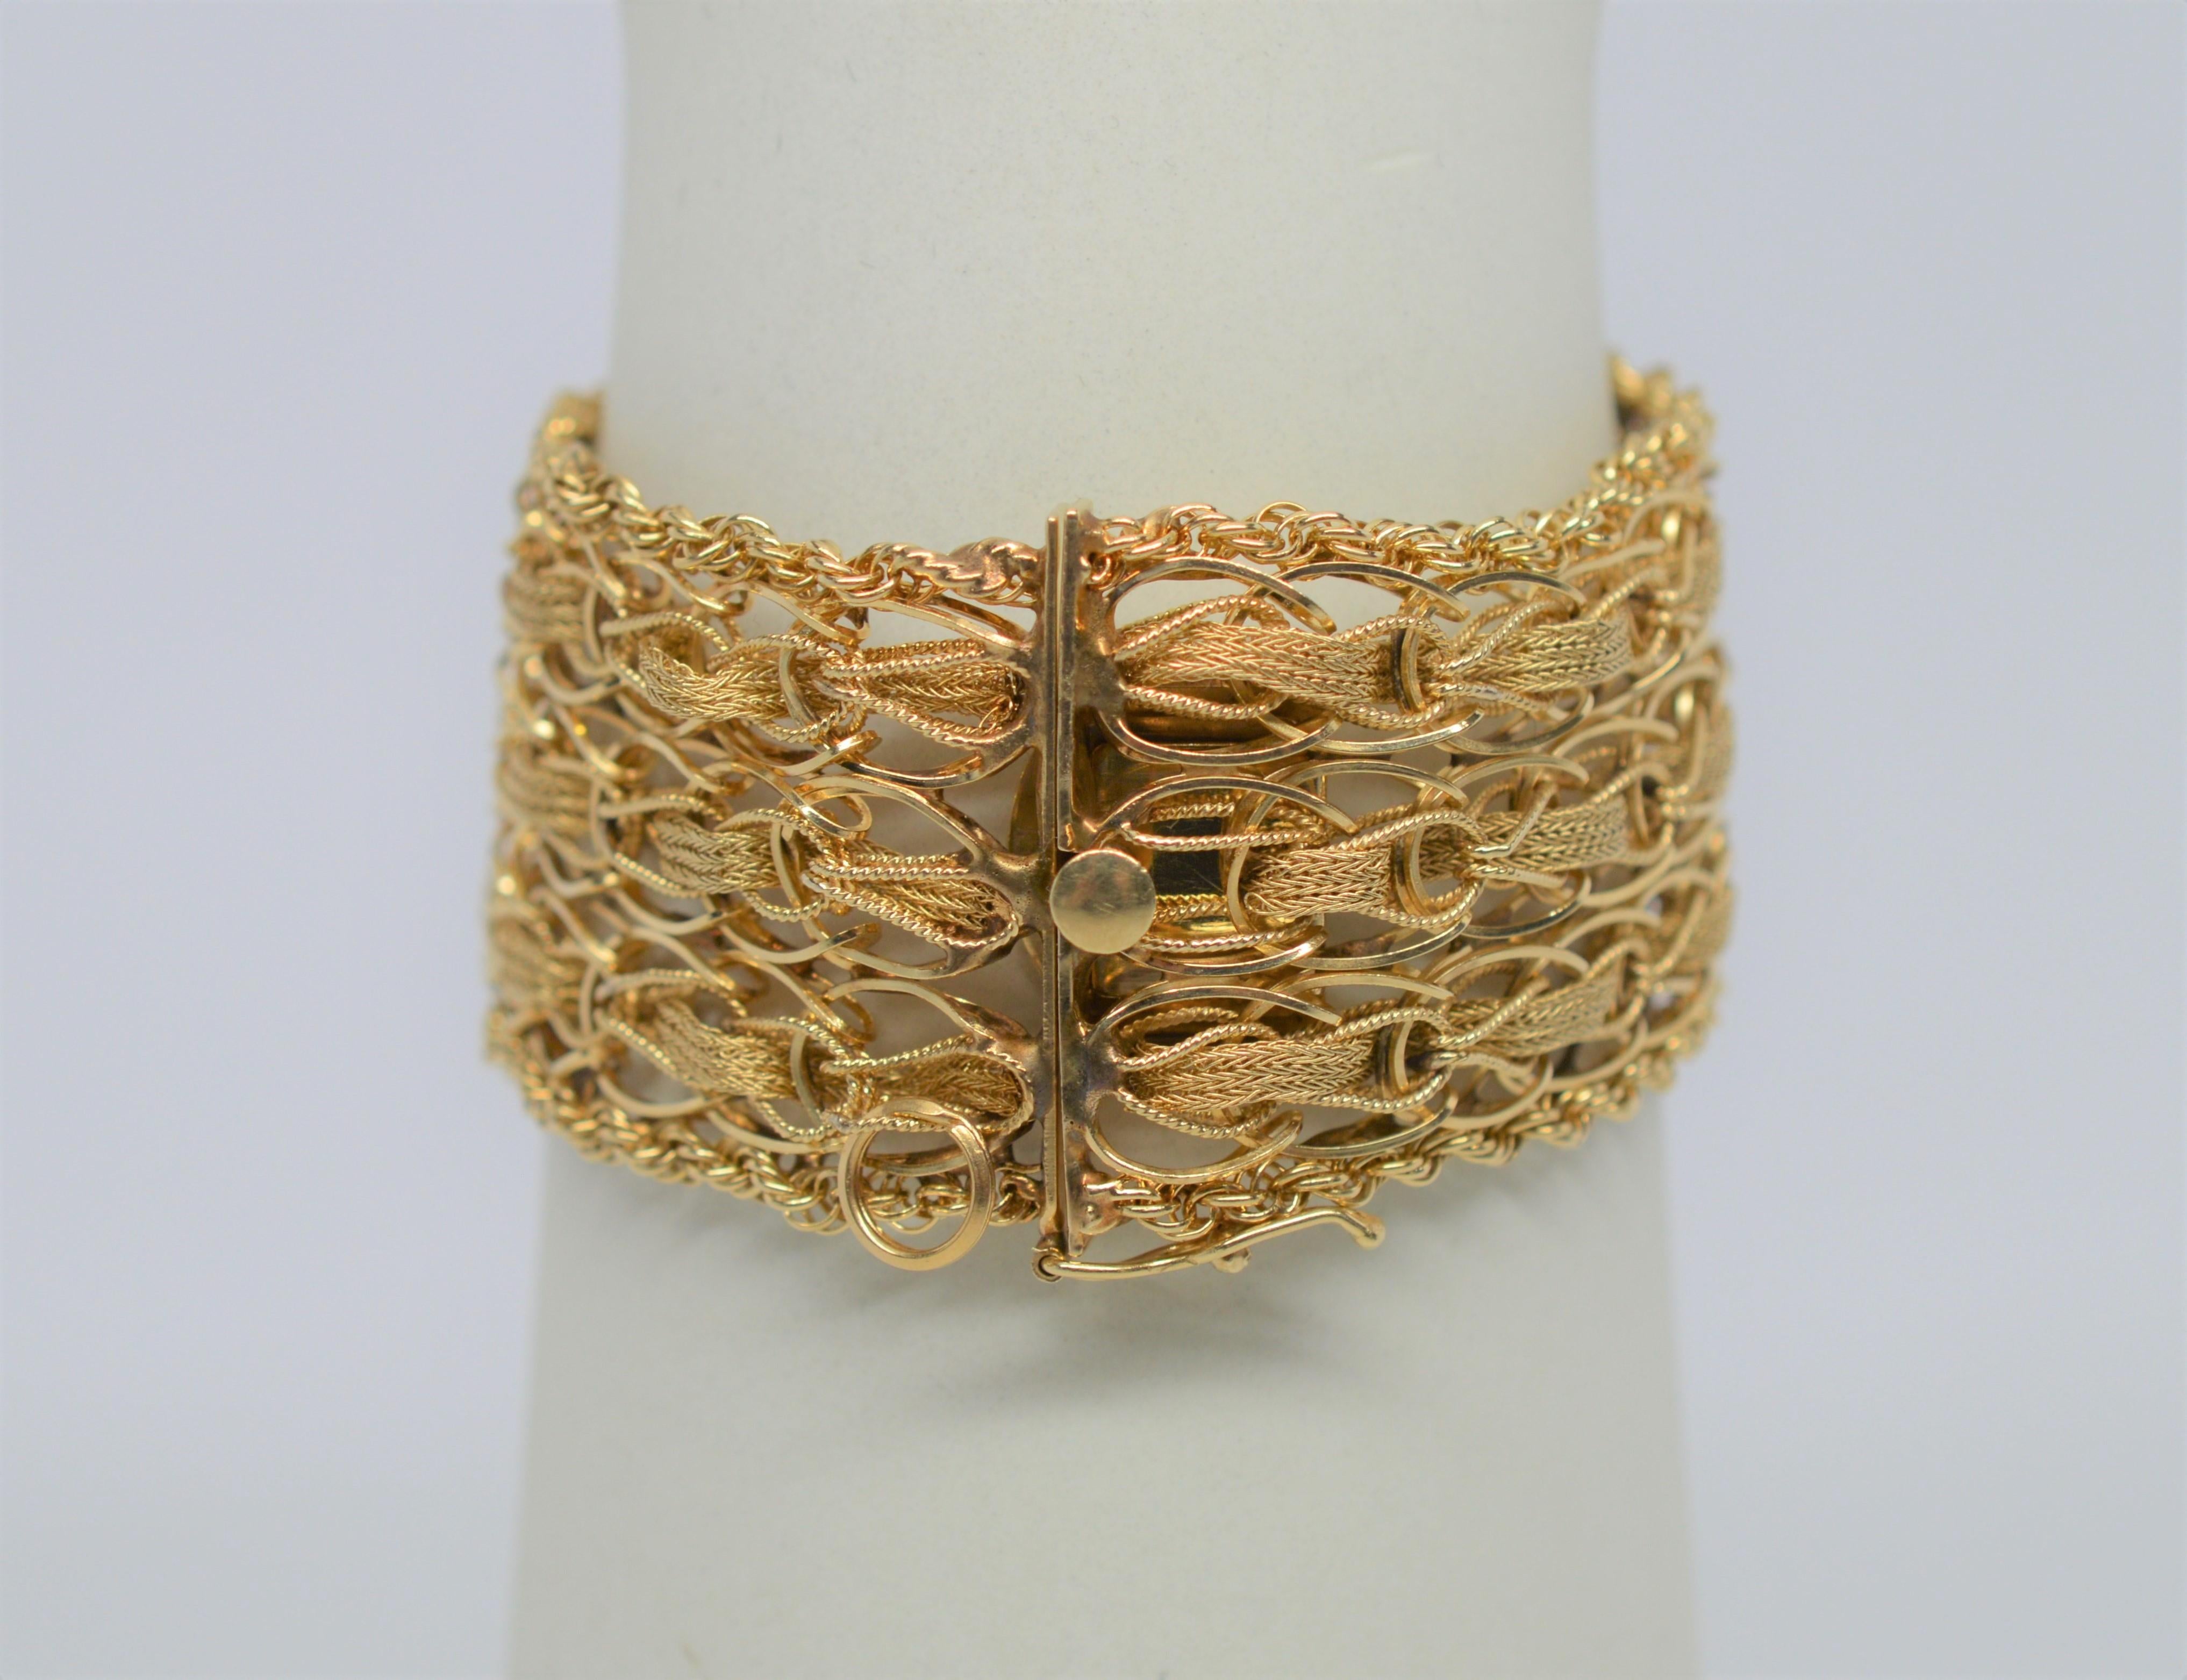 Woven Rope 14 Karat Yellow Gold Wide Bracelet In Excellent Condition For Sale In Mount Kisco, NY